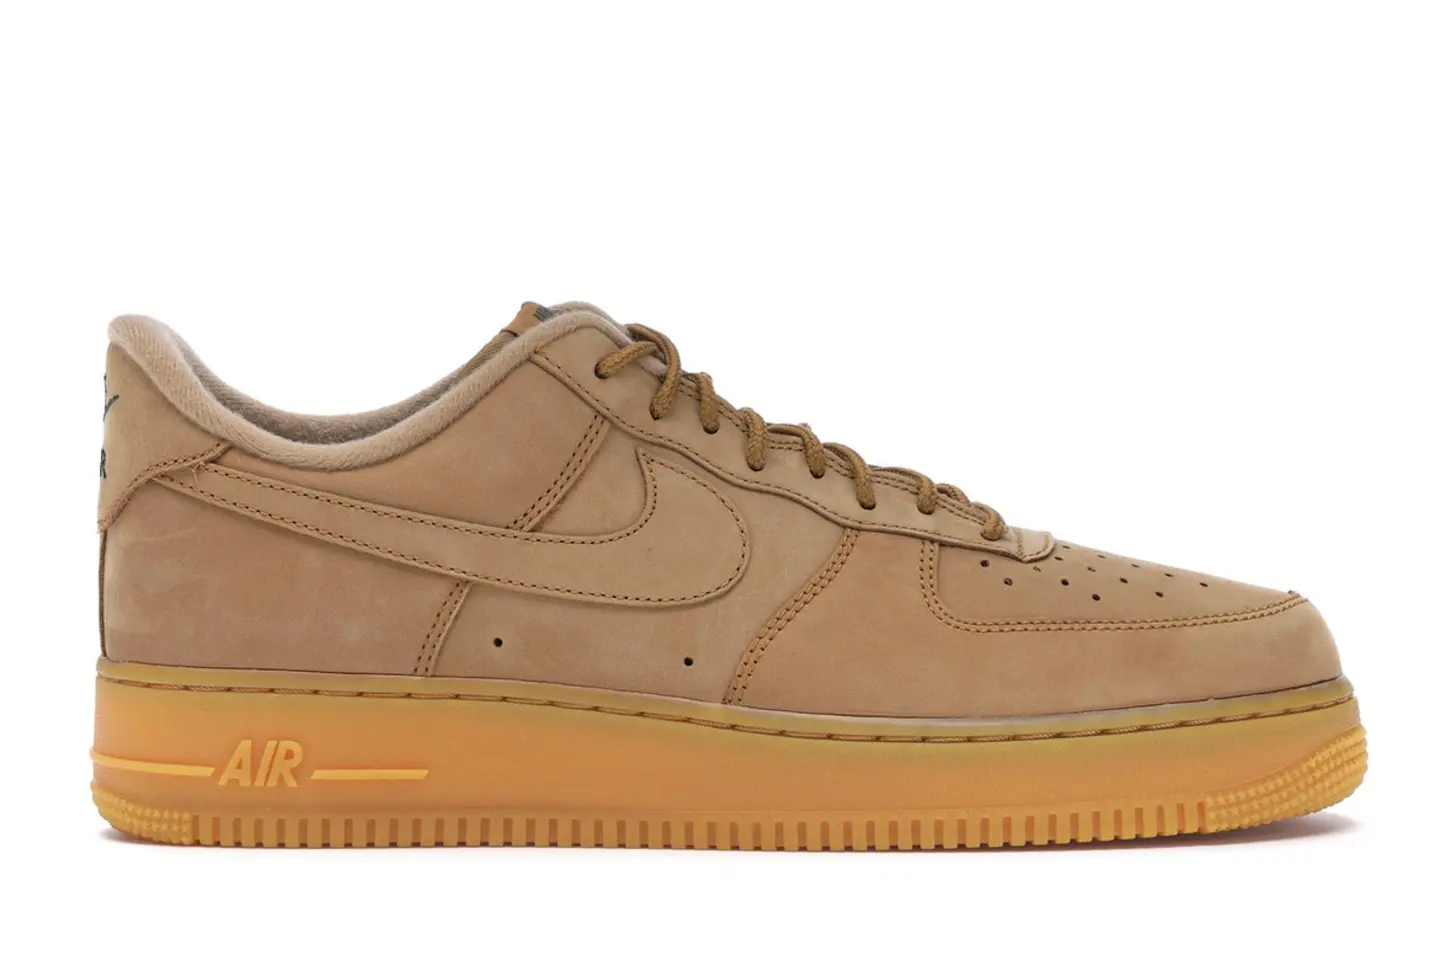 Nike Air Force 1 Low Flax (2018) Men's - AA4061-200 - US